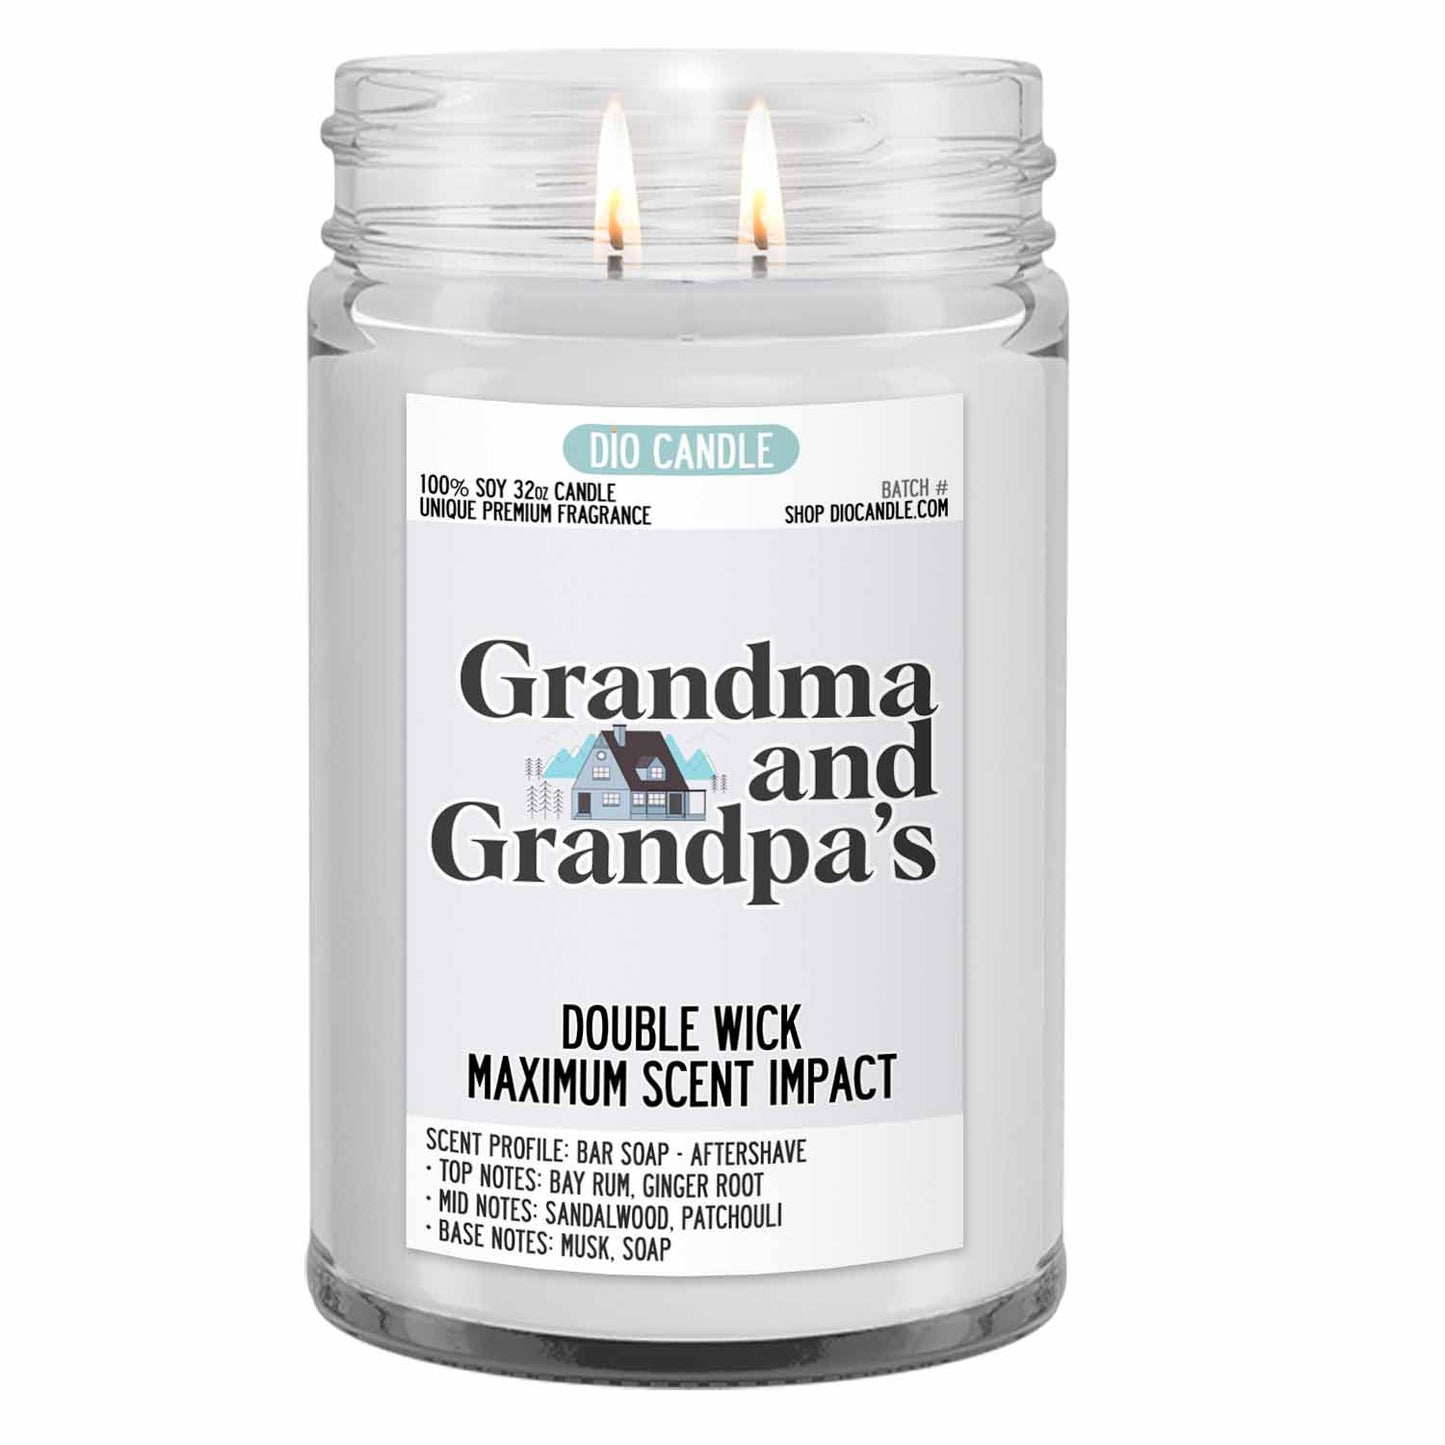 Grandparents House Candle